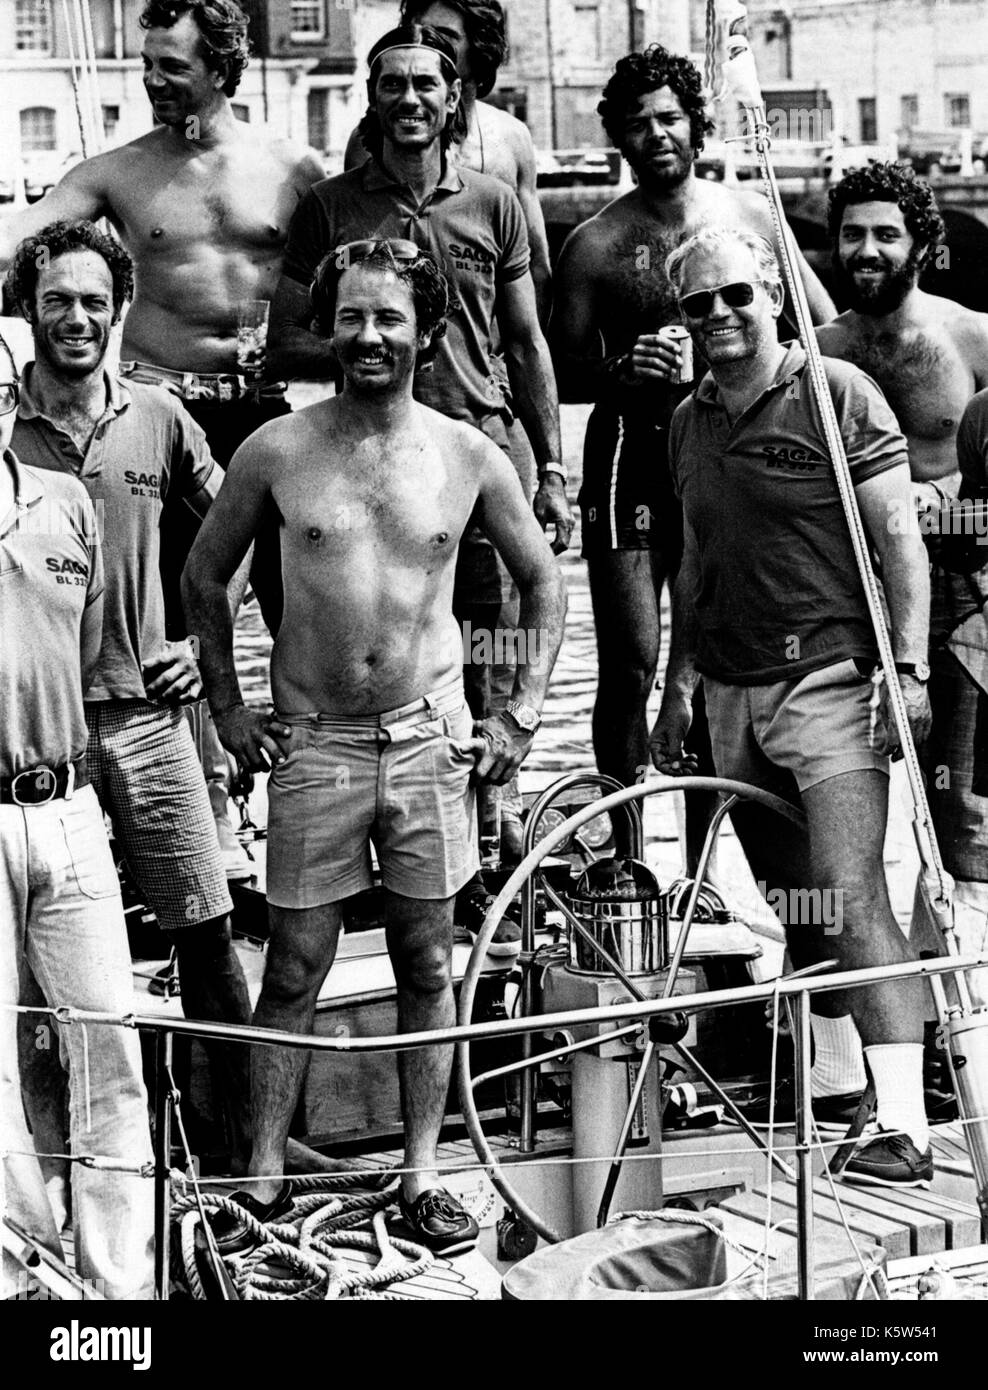 AJAXNETPHOTO. 13TH AUGUST, 1973. PLYMOUTH, ENGLAND. - ADMIRAL'S CUP - CREW OF THE BRAZILIAN TEAM YACHT SAGA IN JUBILANT MOD AS THEIR YACHT DOCKED AT THE END OF THE 605 MILE OFFSHORE YACHT RACE.  PHOTO:JONATHAN EASTLAND/AJAX REF:SAGA CREW 731308 Stock Photo